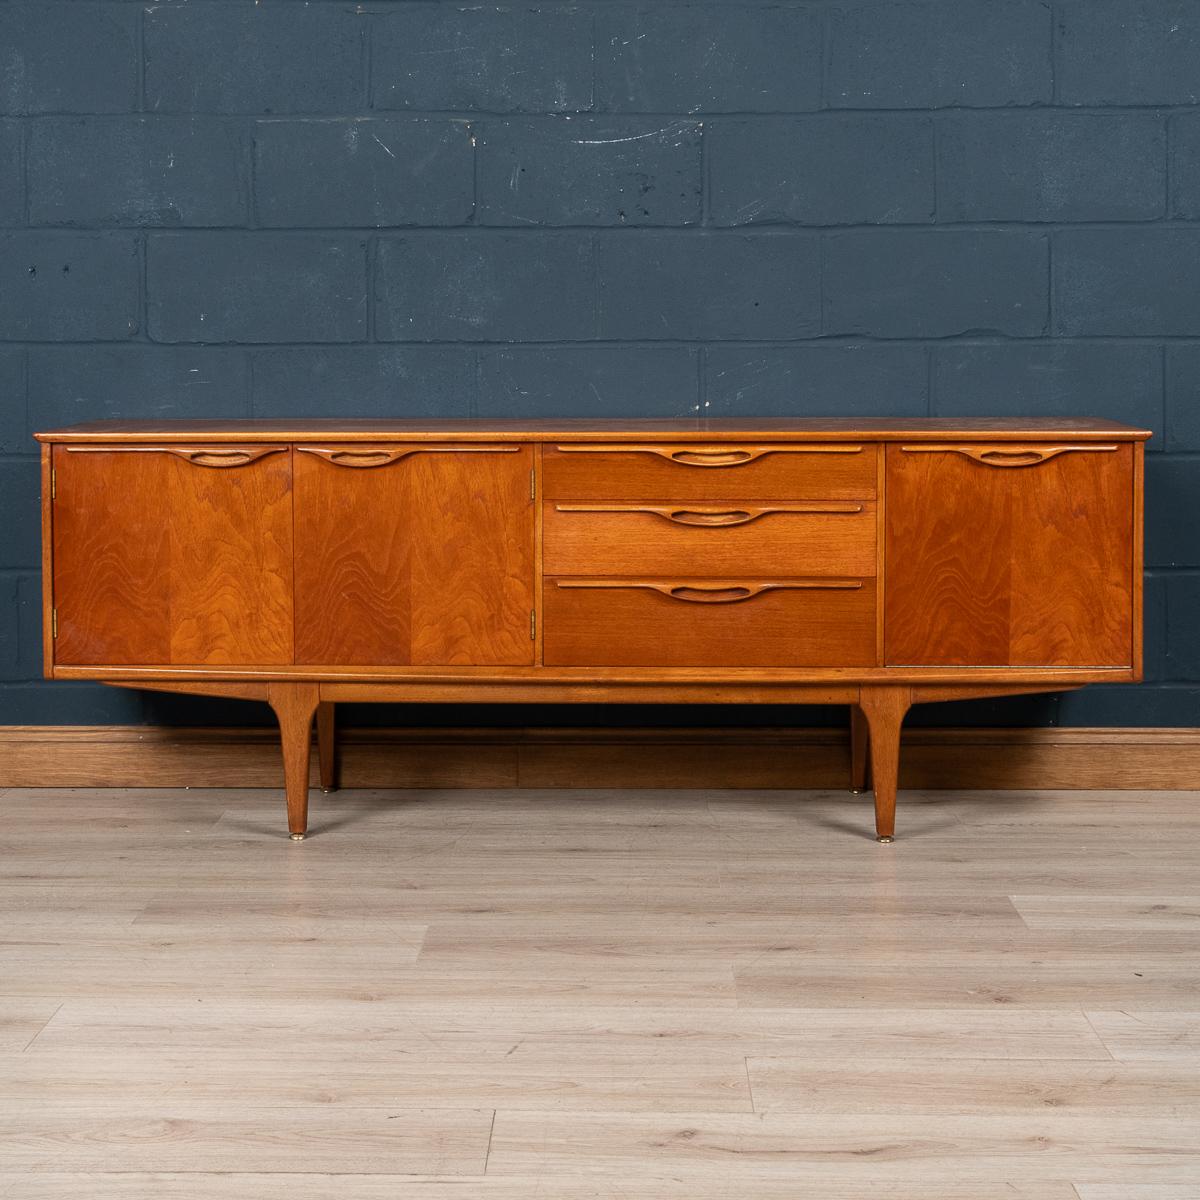 A mid 20th Century beautiful English sideboard. Realised entirely in teak wood as was very fashionable in the 1960's these sideboards have had a resurgence in popularity in the modern era as mid century furniture takes pride of place, mixing the new